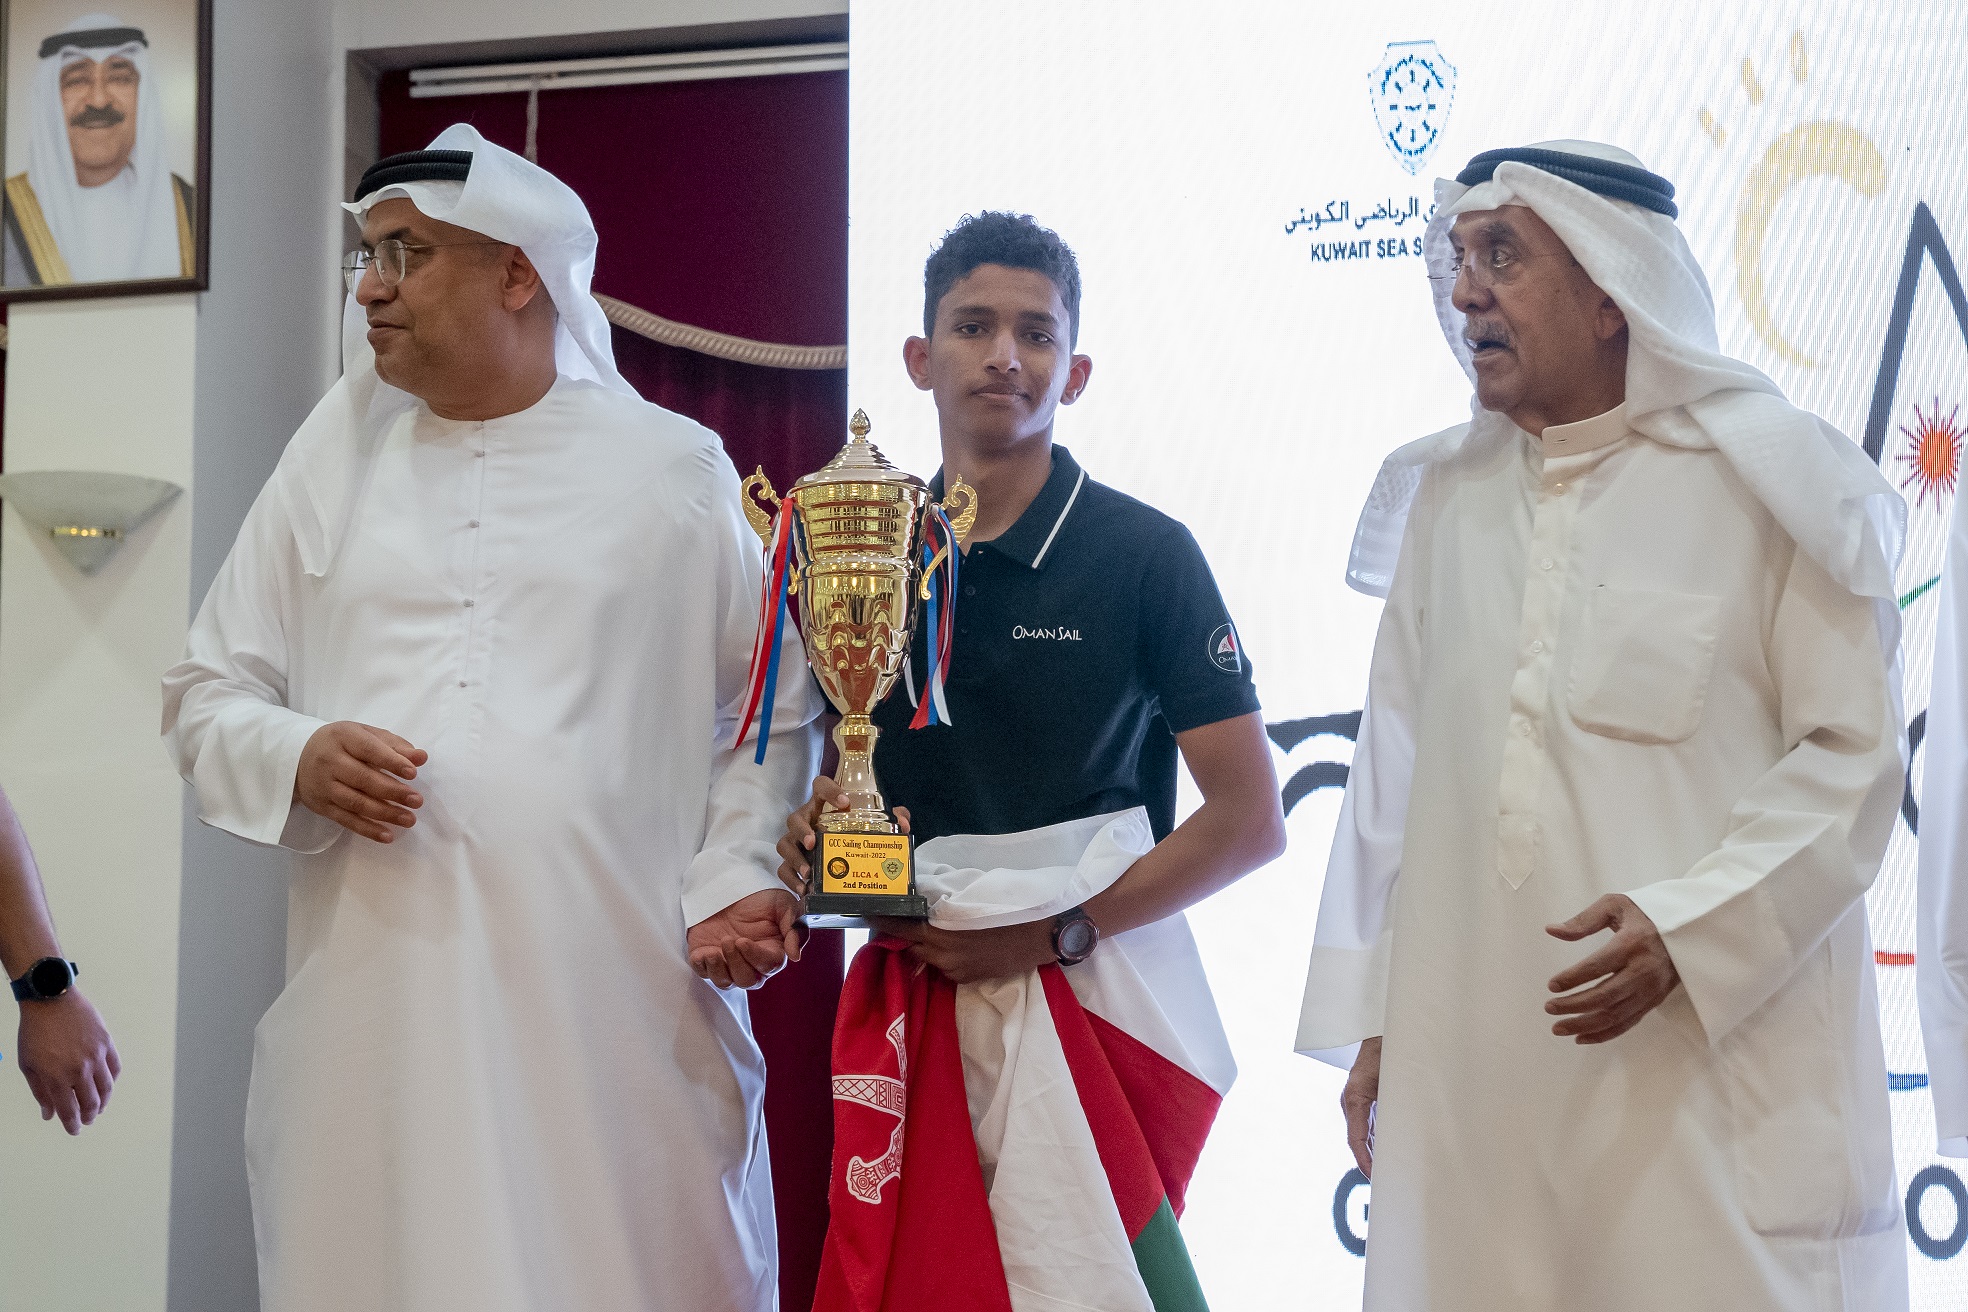 Our team concludes the GCC Sailing Championships in Kuwait with highest yield of medals